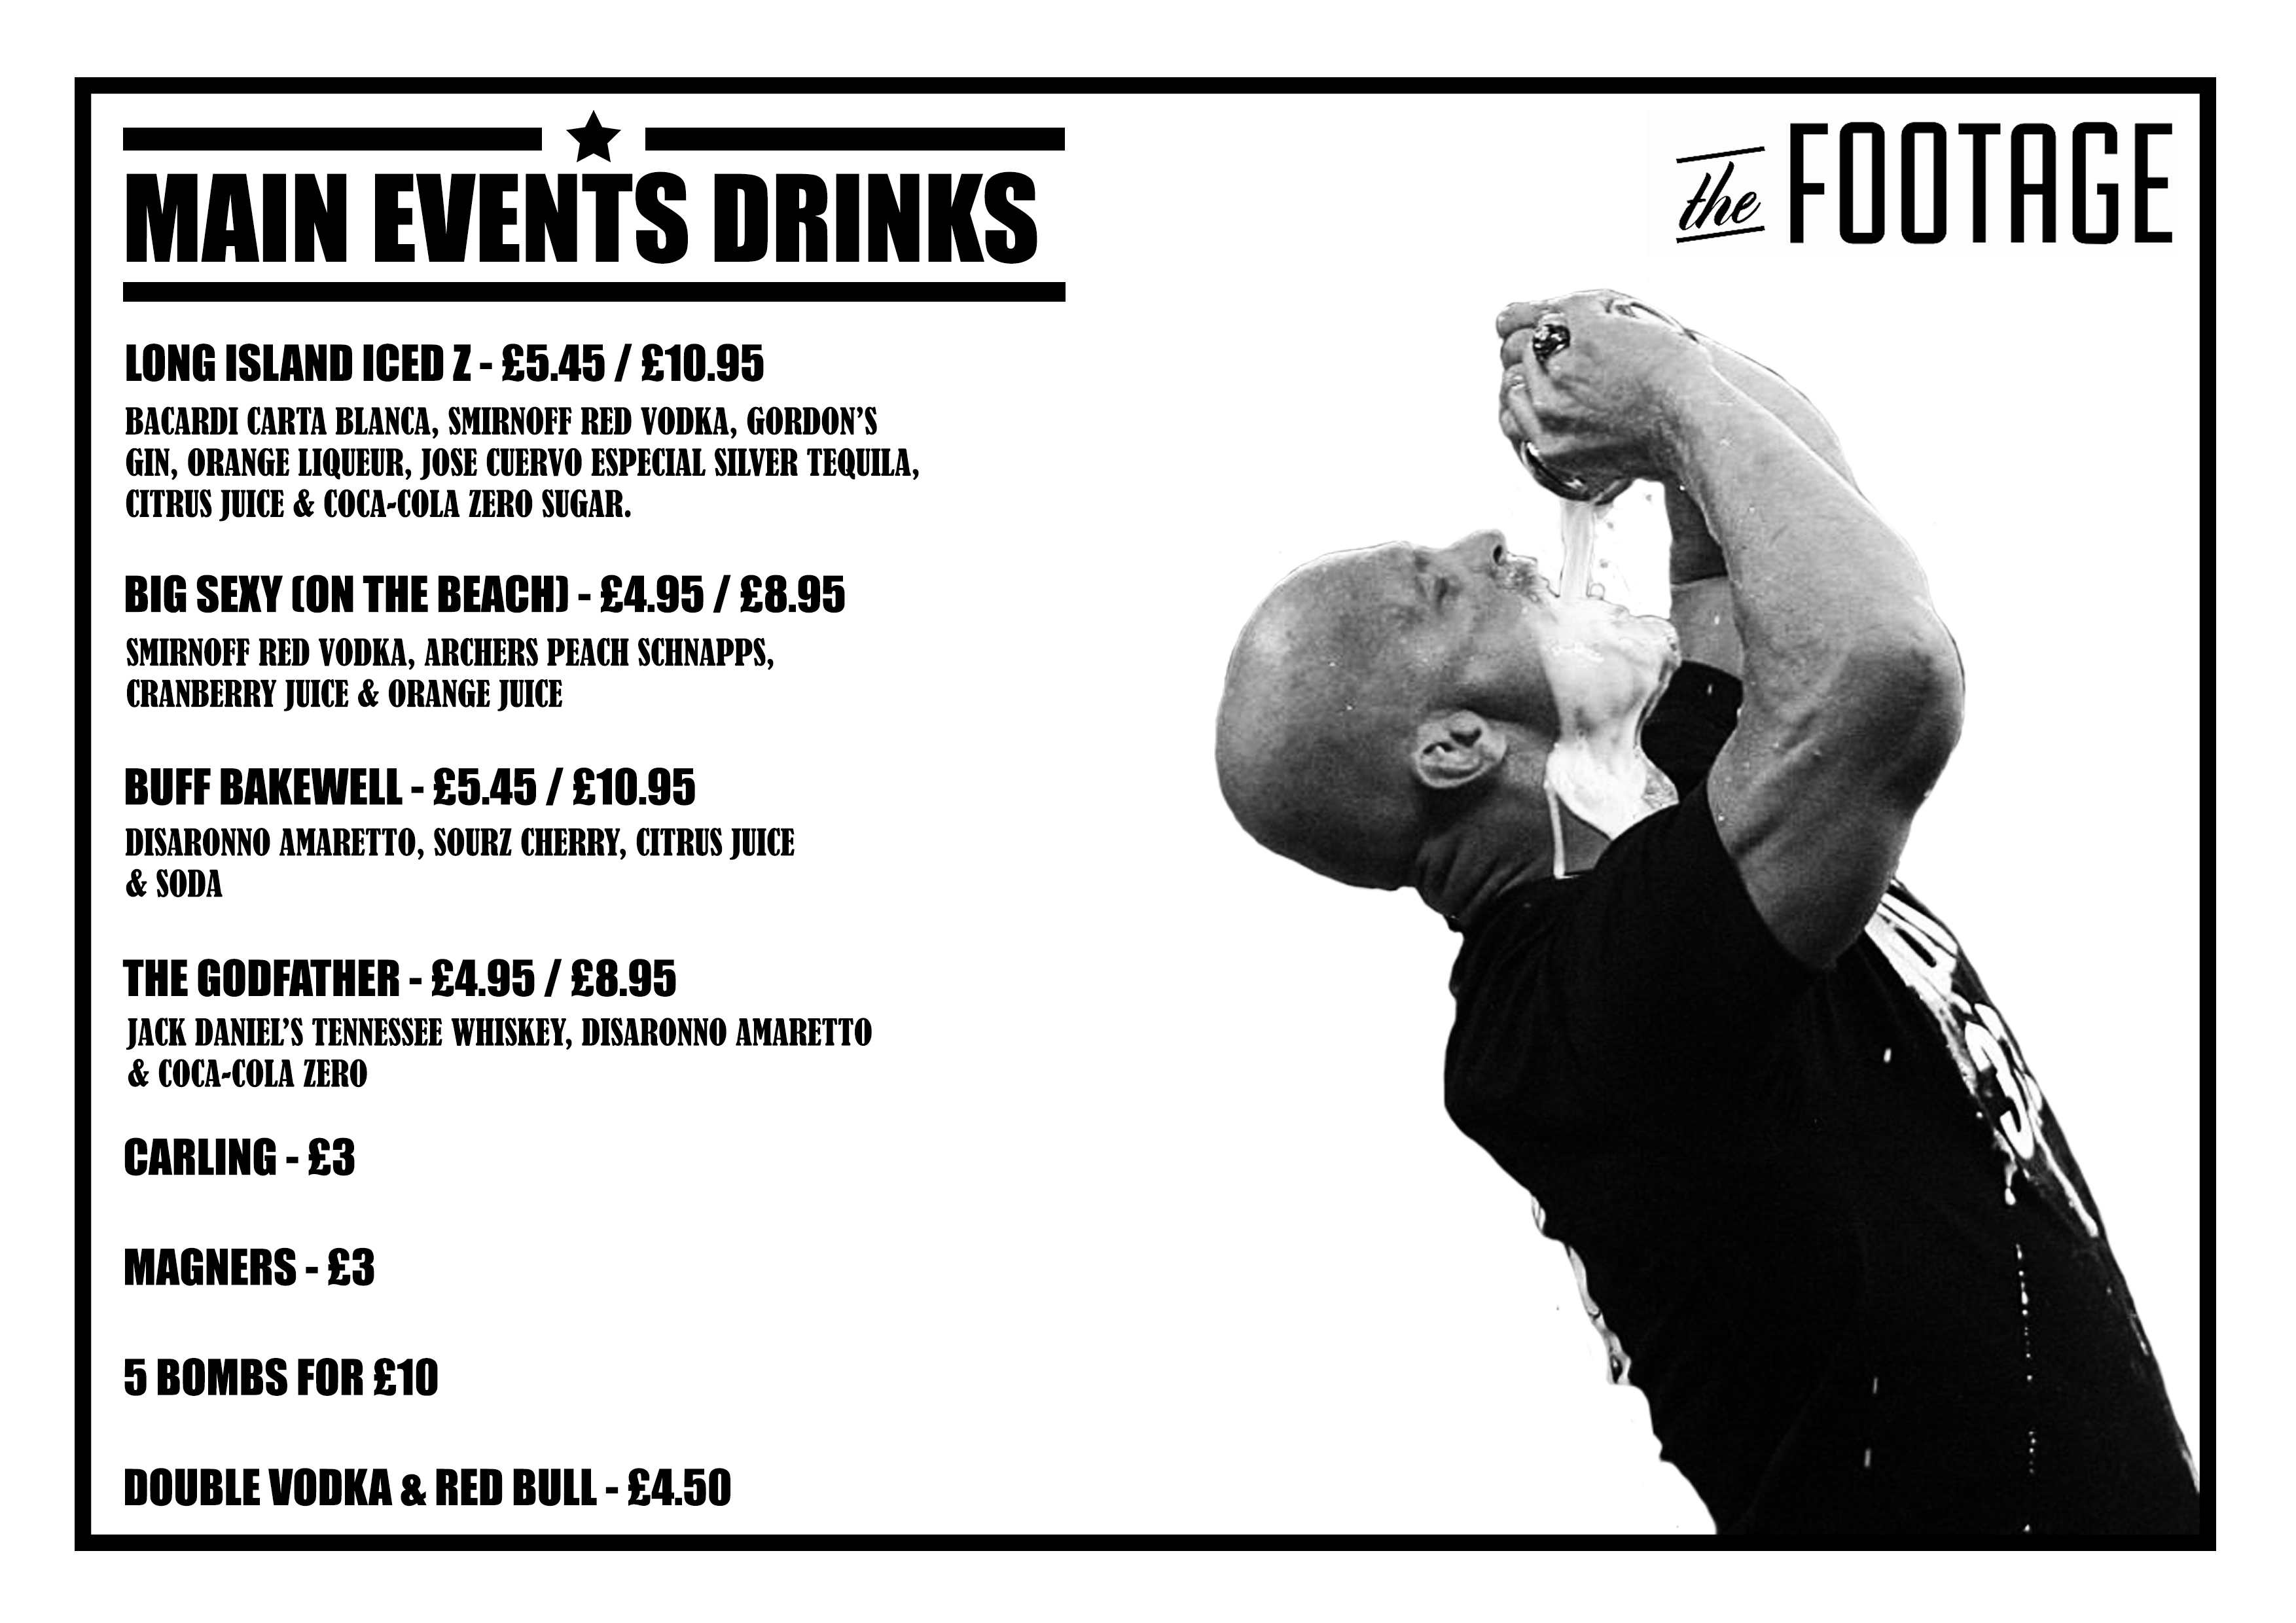 Main Events Wrestling PPV Drinks Deals The Footage Manchester